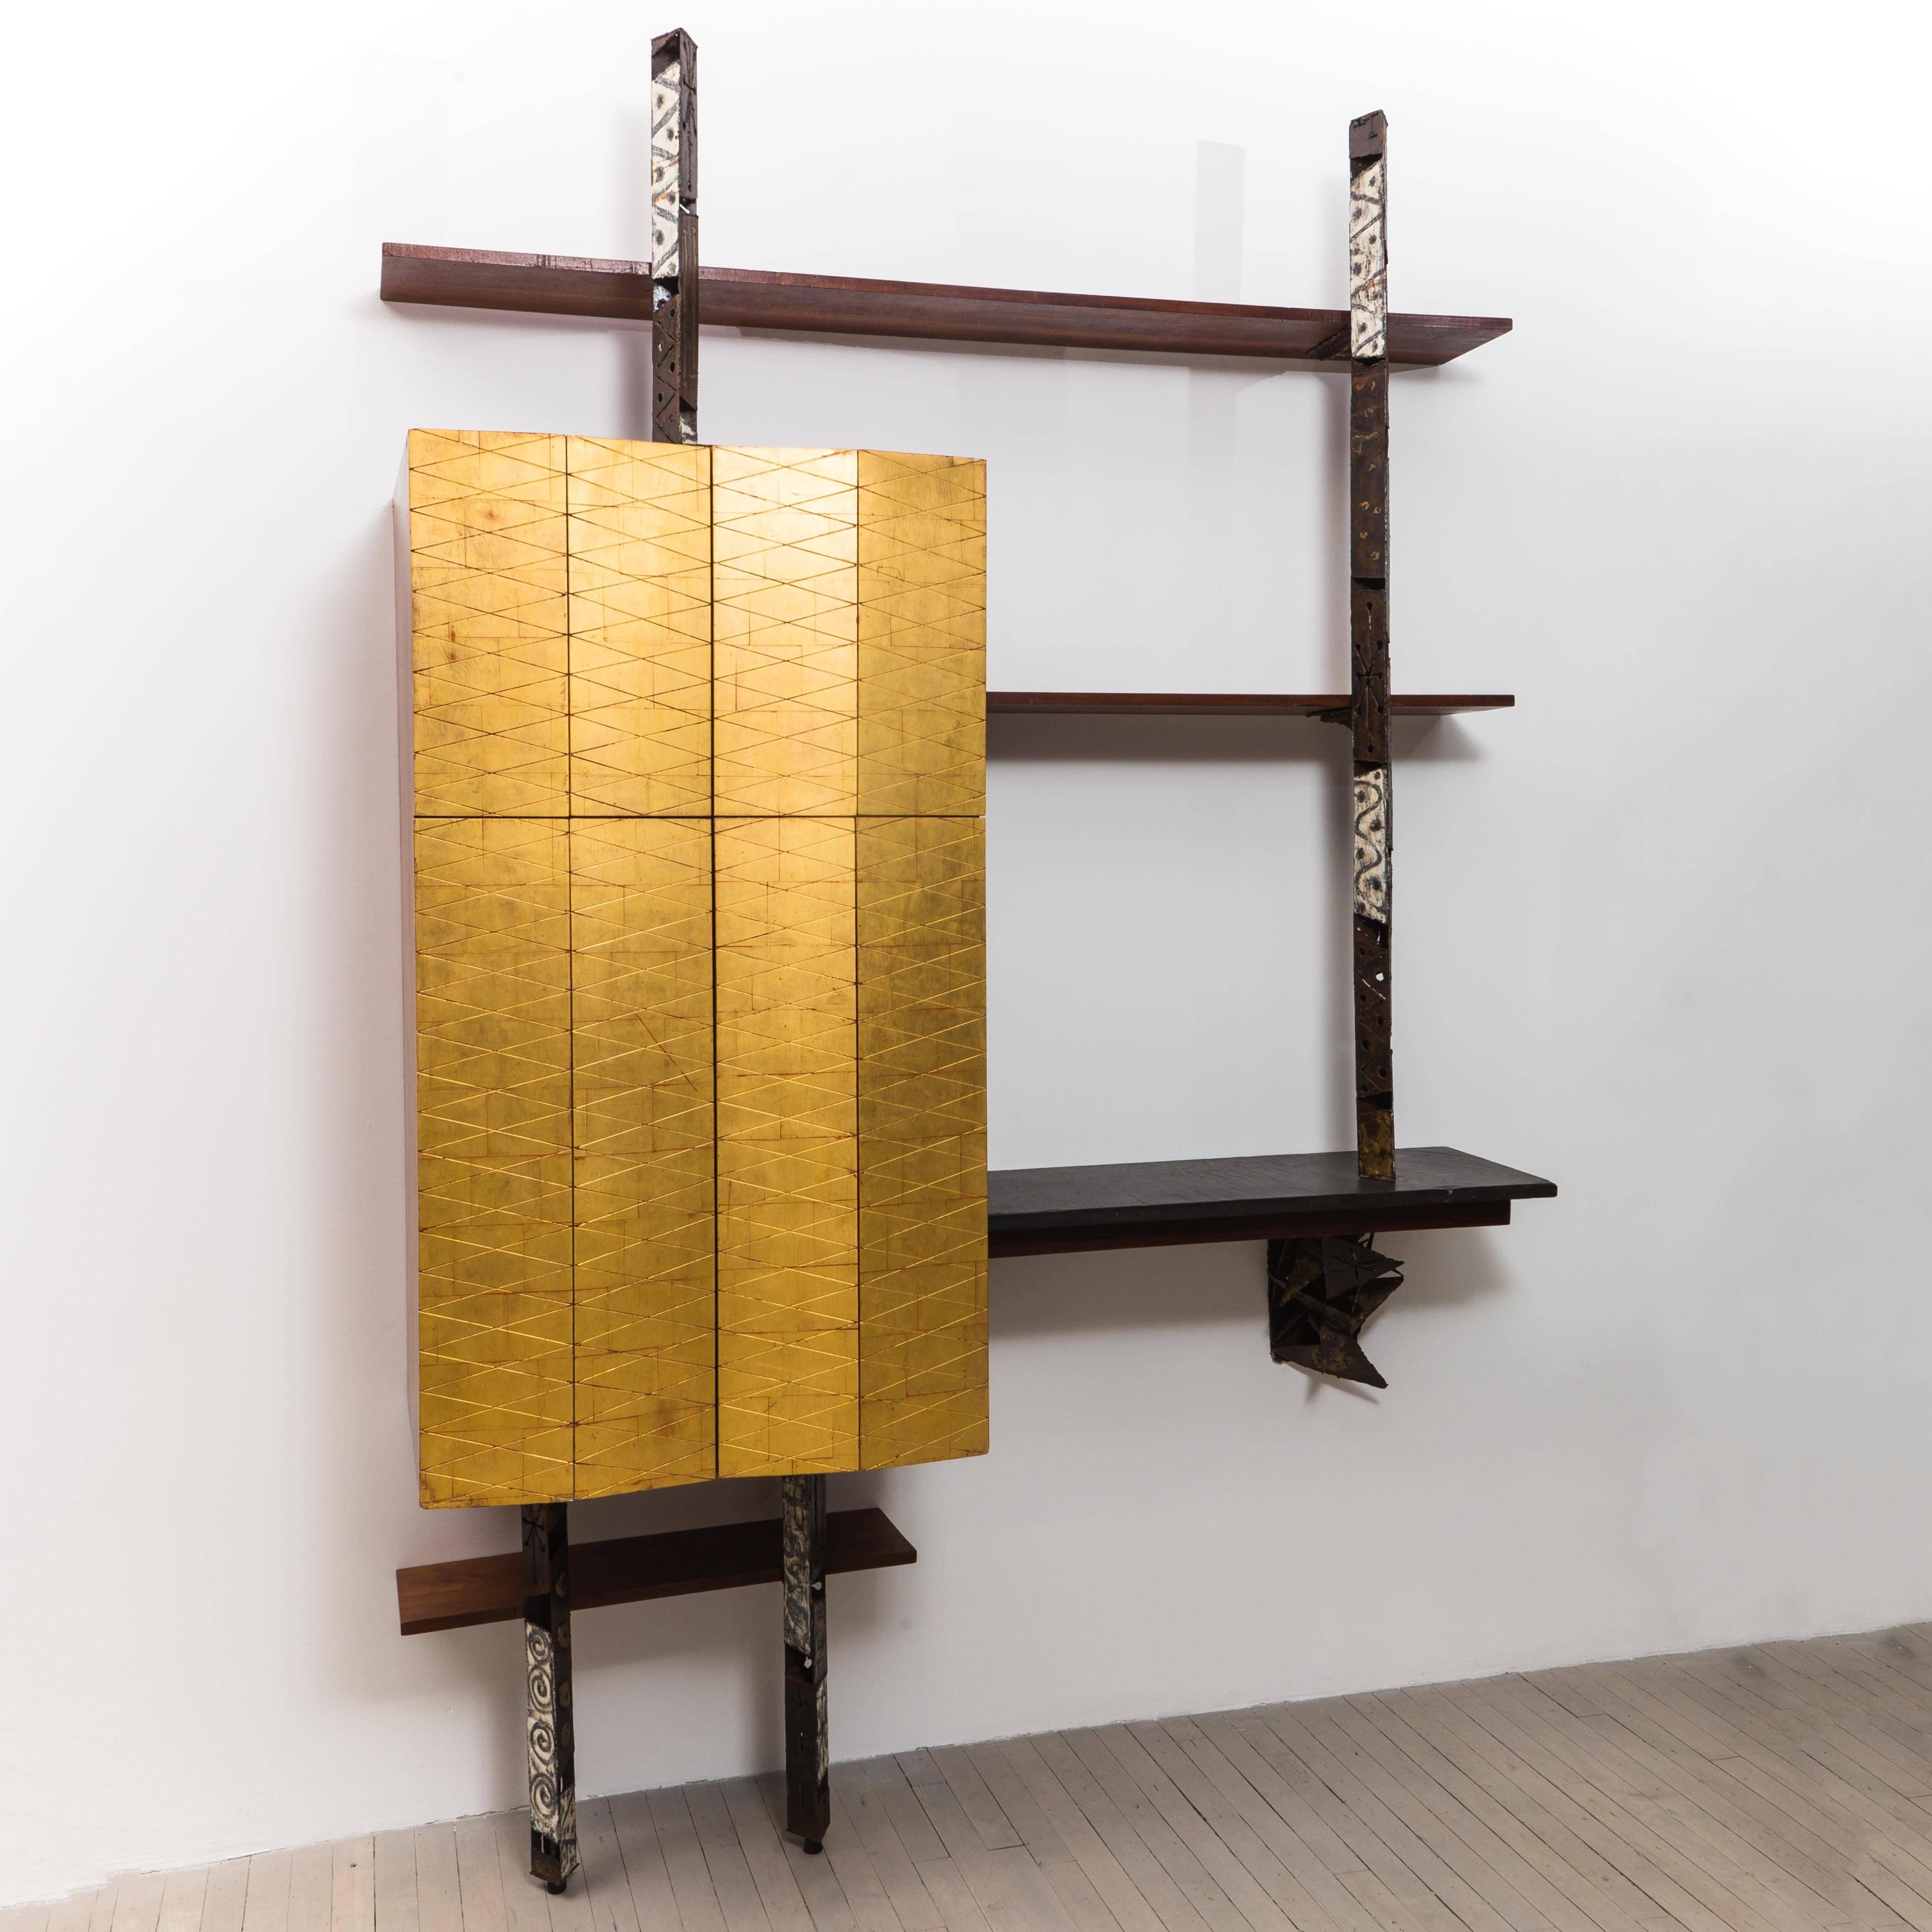 A custom commissioned bar cabinet and serving-shelf unit designed and handmade collaboratively by Phil Powell and Paul Evans, circa 1964. This is a fantastic and rare piece that represents the early creative partnership between the artists: with